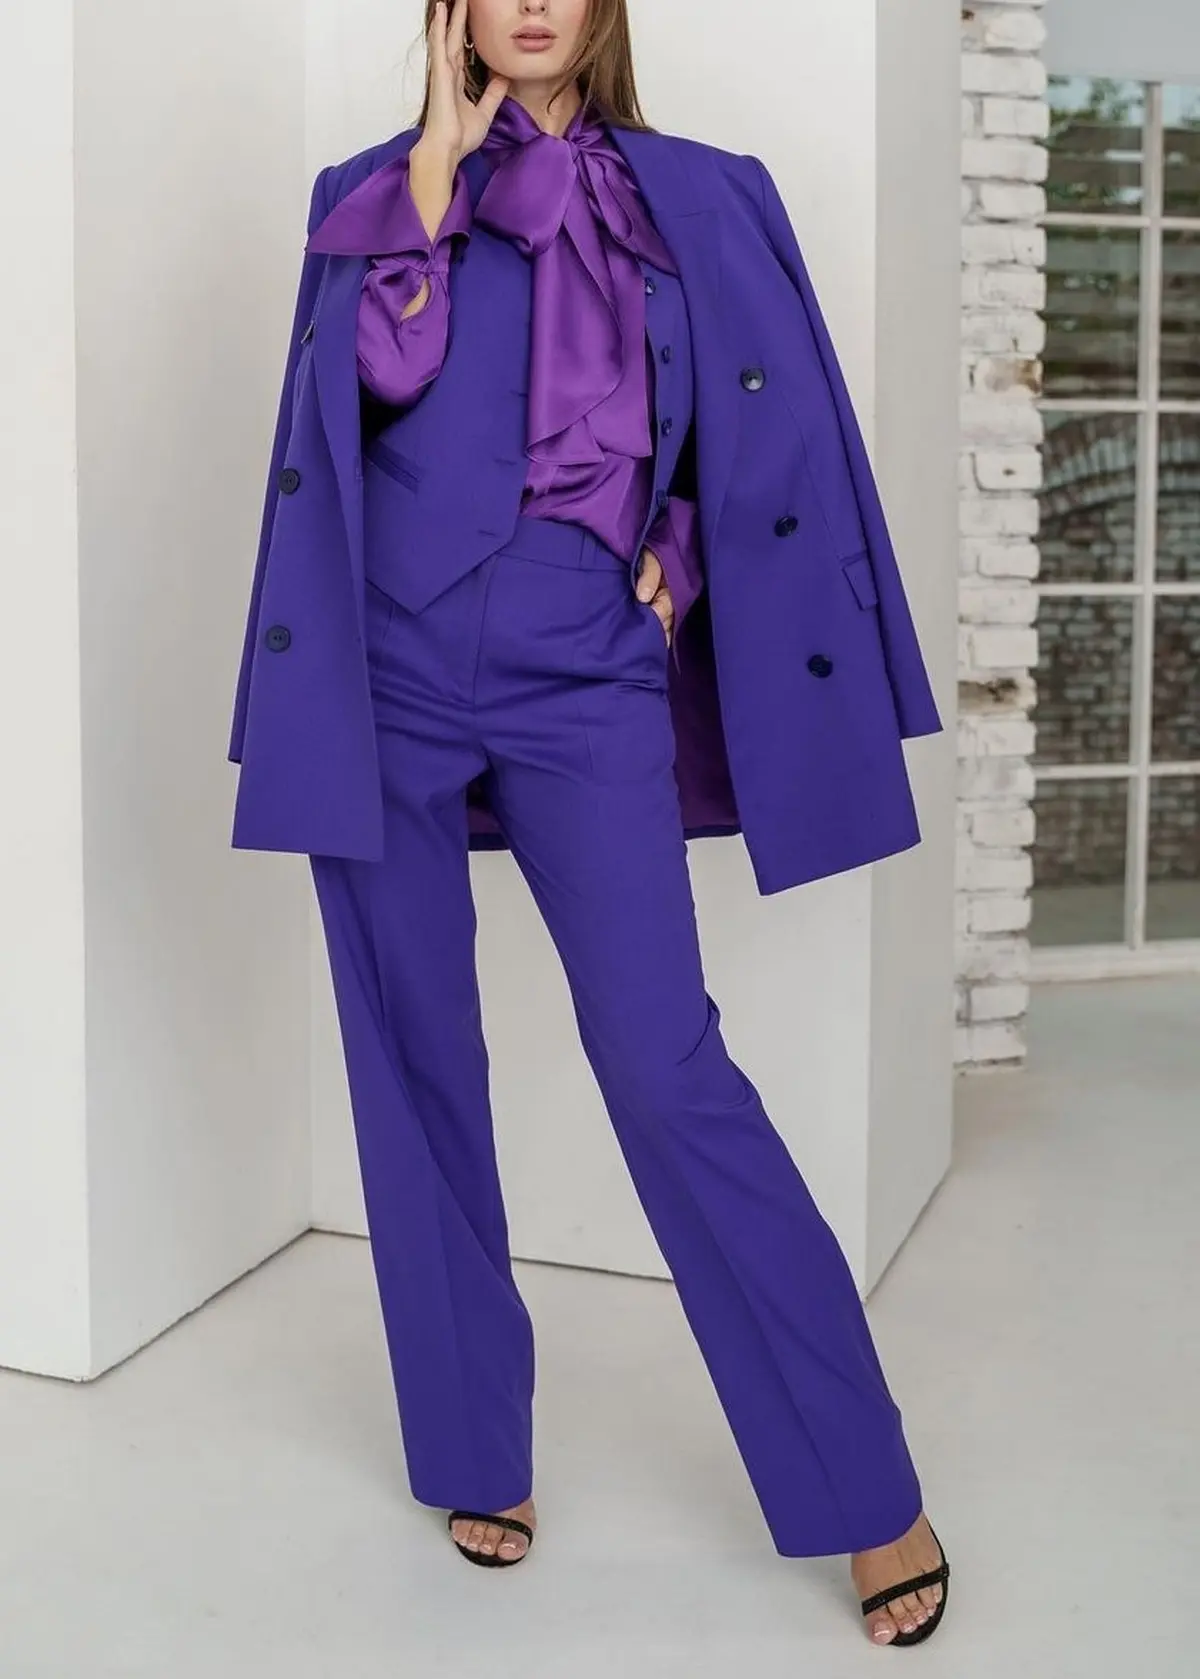 dark blue suit paired with purple satin shirt